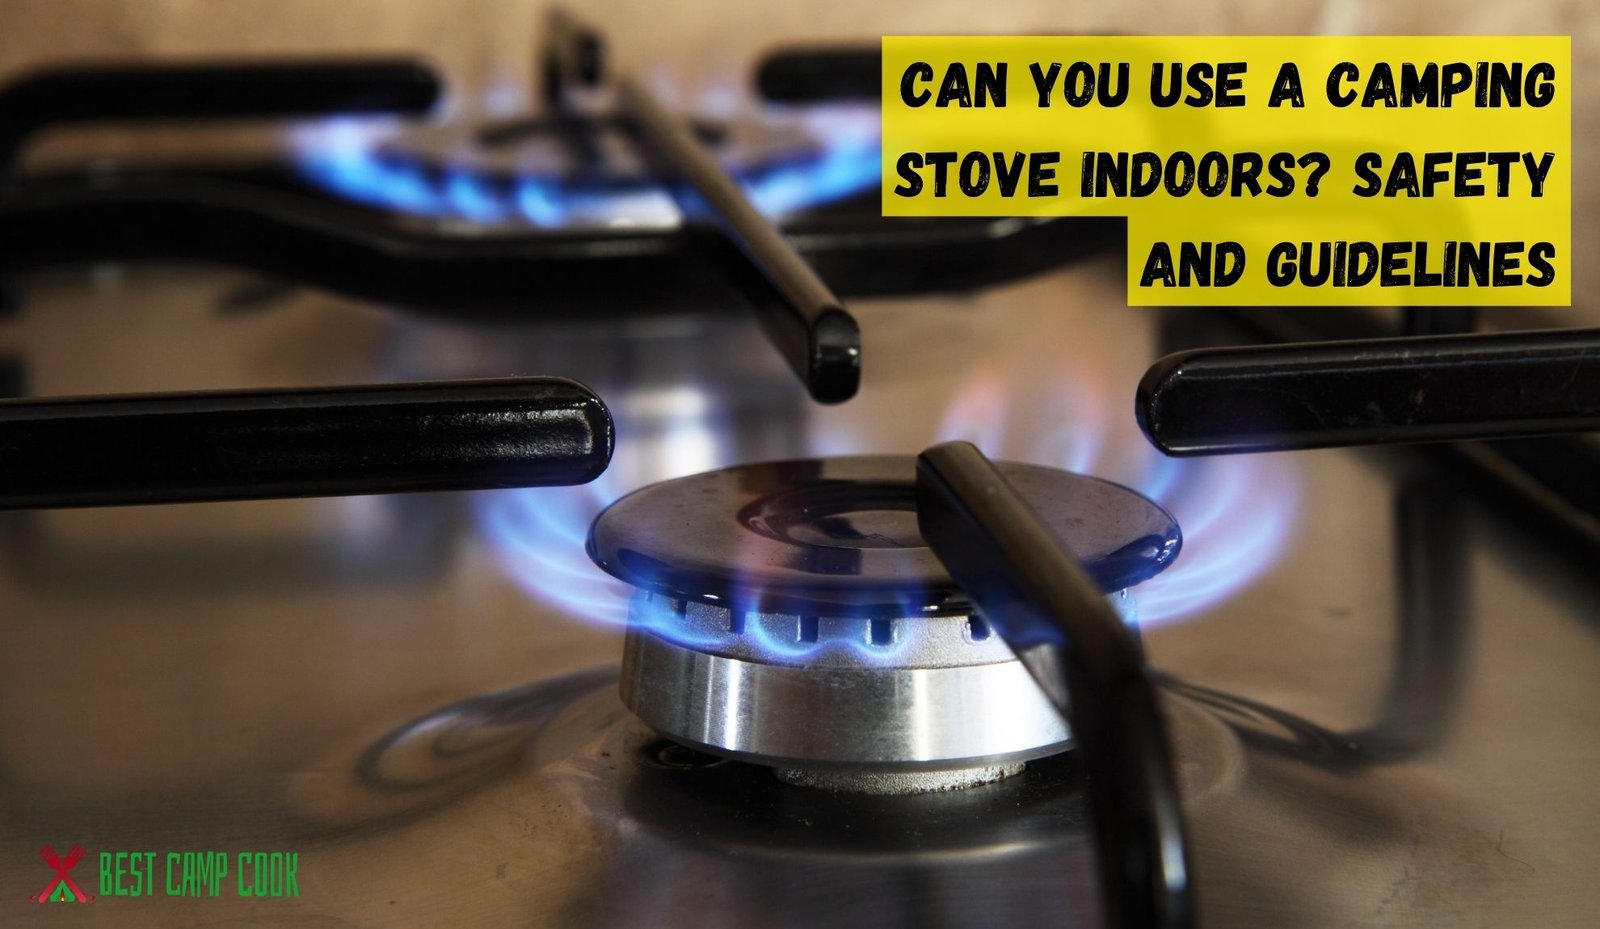 Can You Use a Camping Stove Indoors